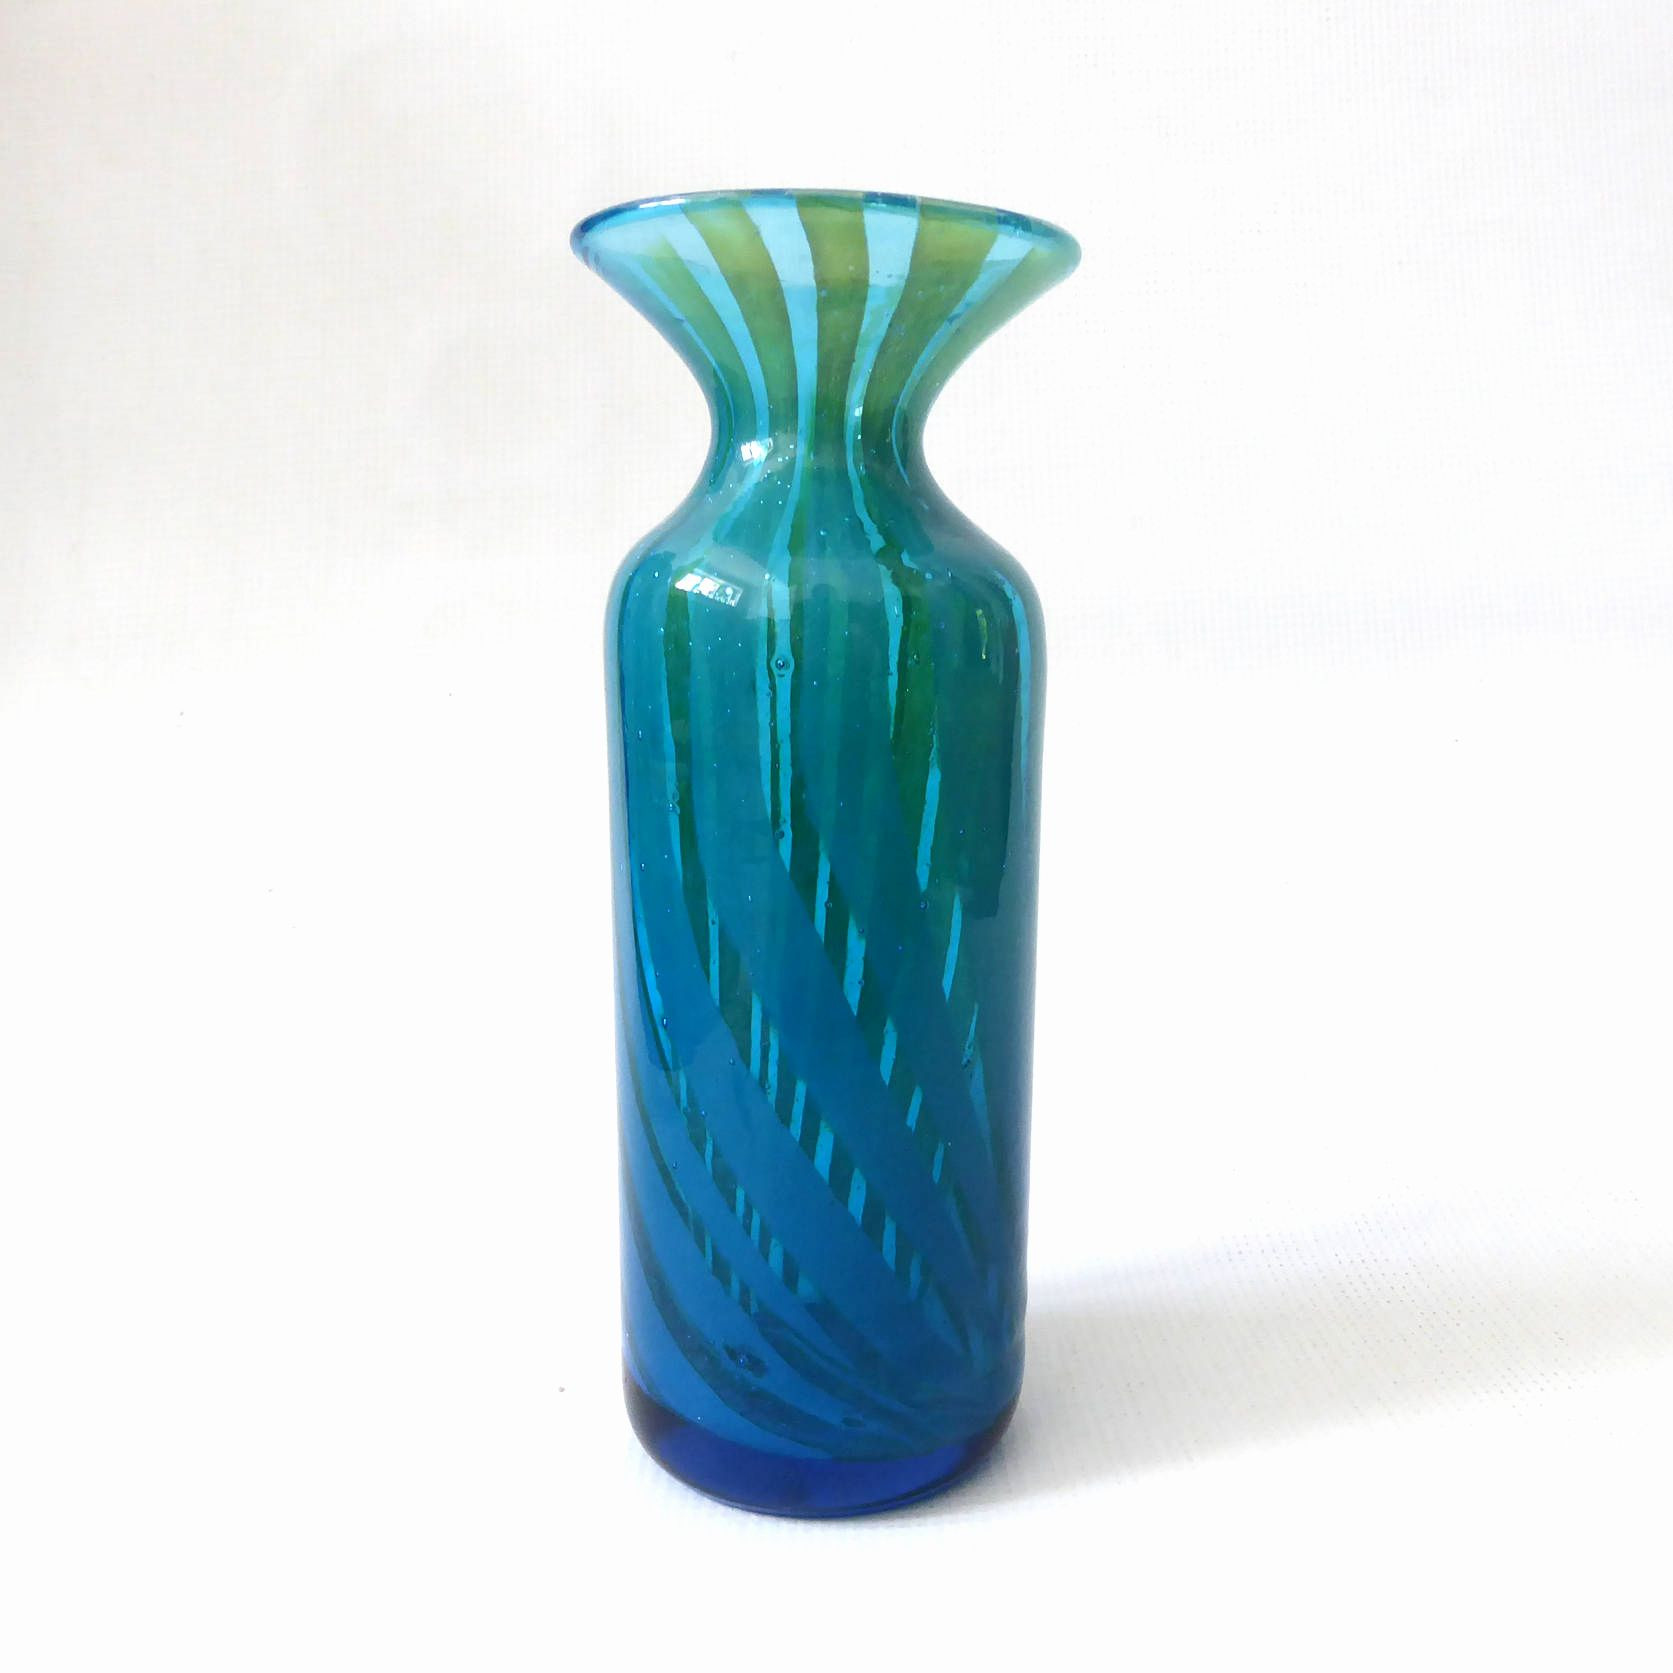 23 Awesome Green Glass Vases for Sale 2024 free download green glass vases for sale of 35 antique green glass vases the weekly world throughout antique glass vases identify vase and cellar image avorcor